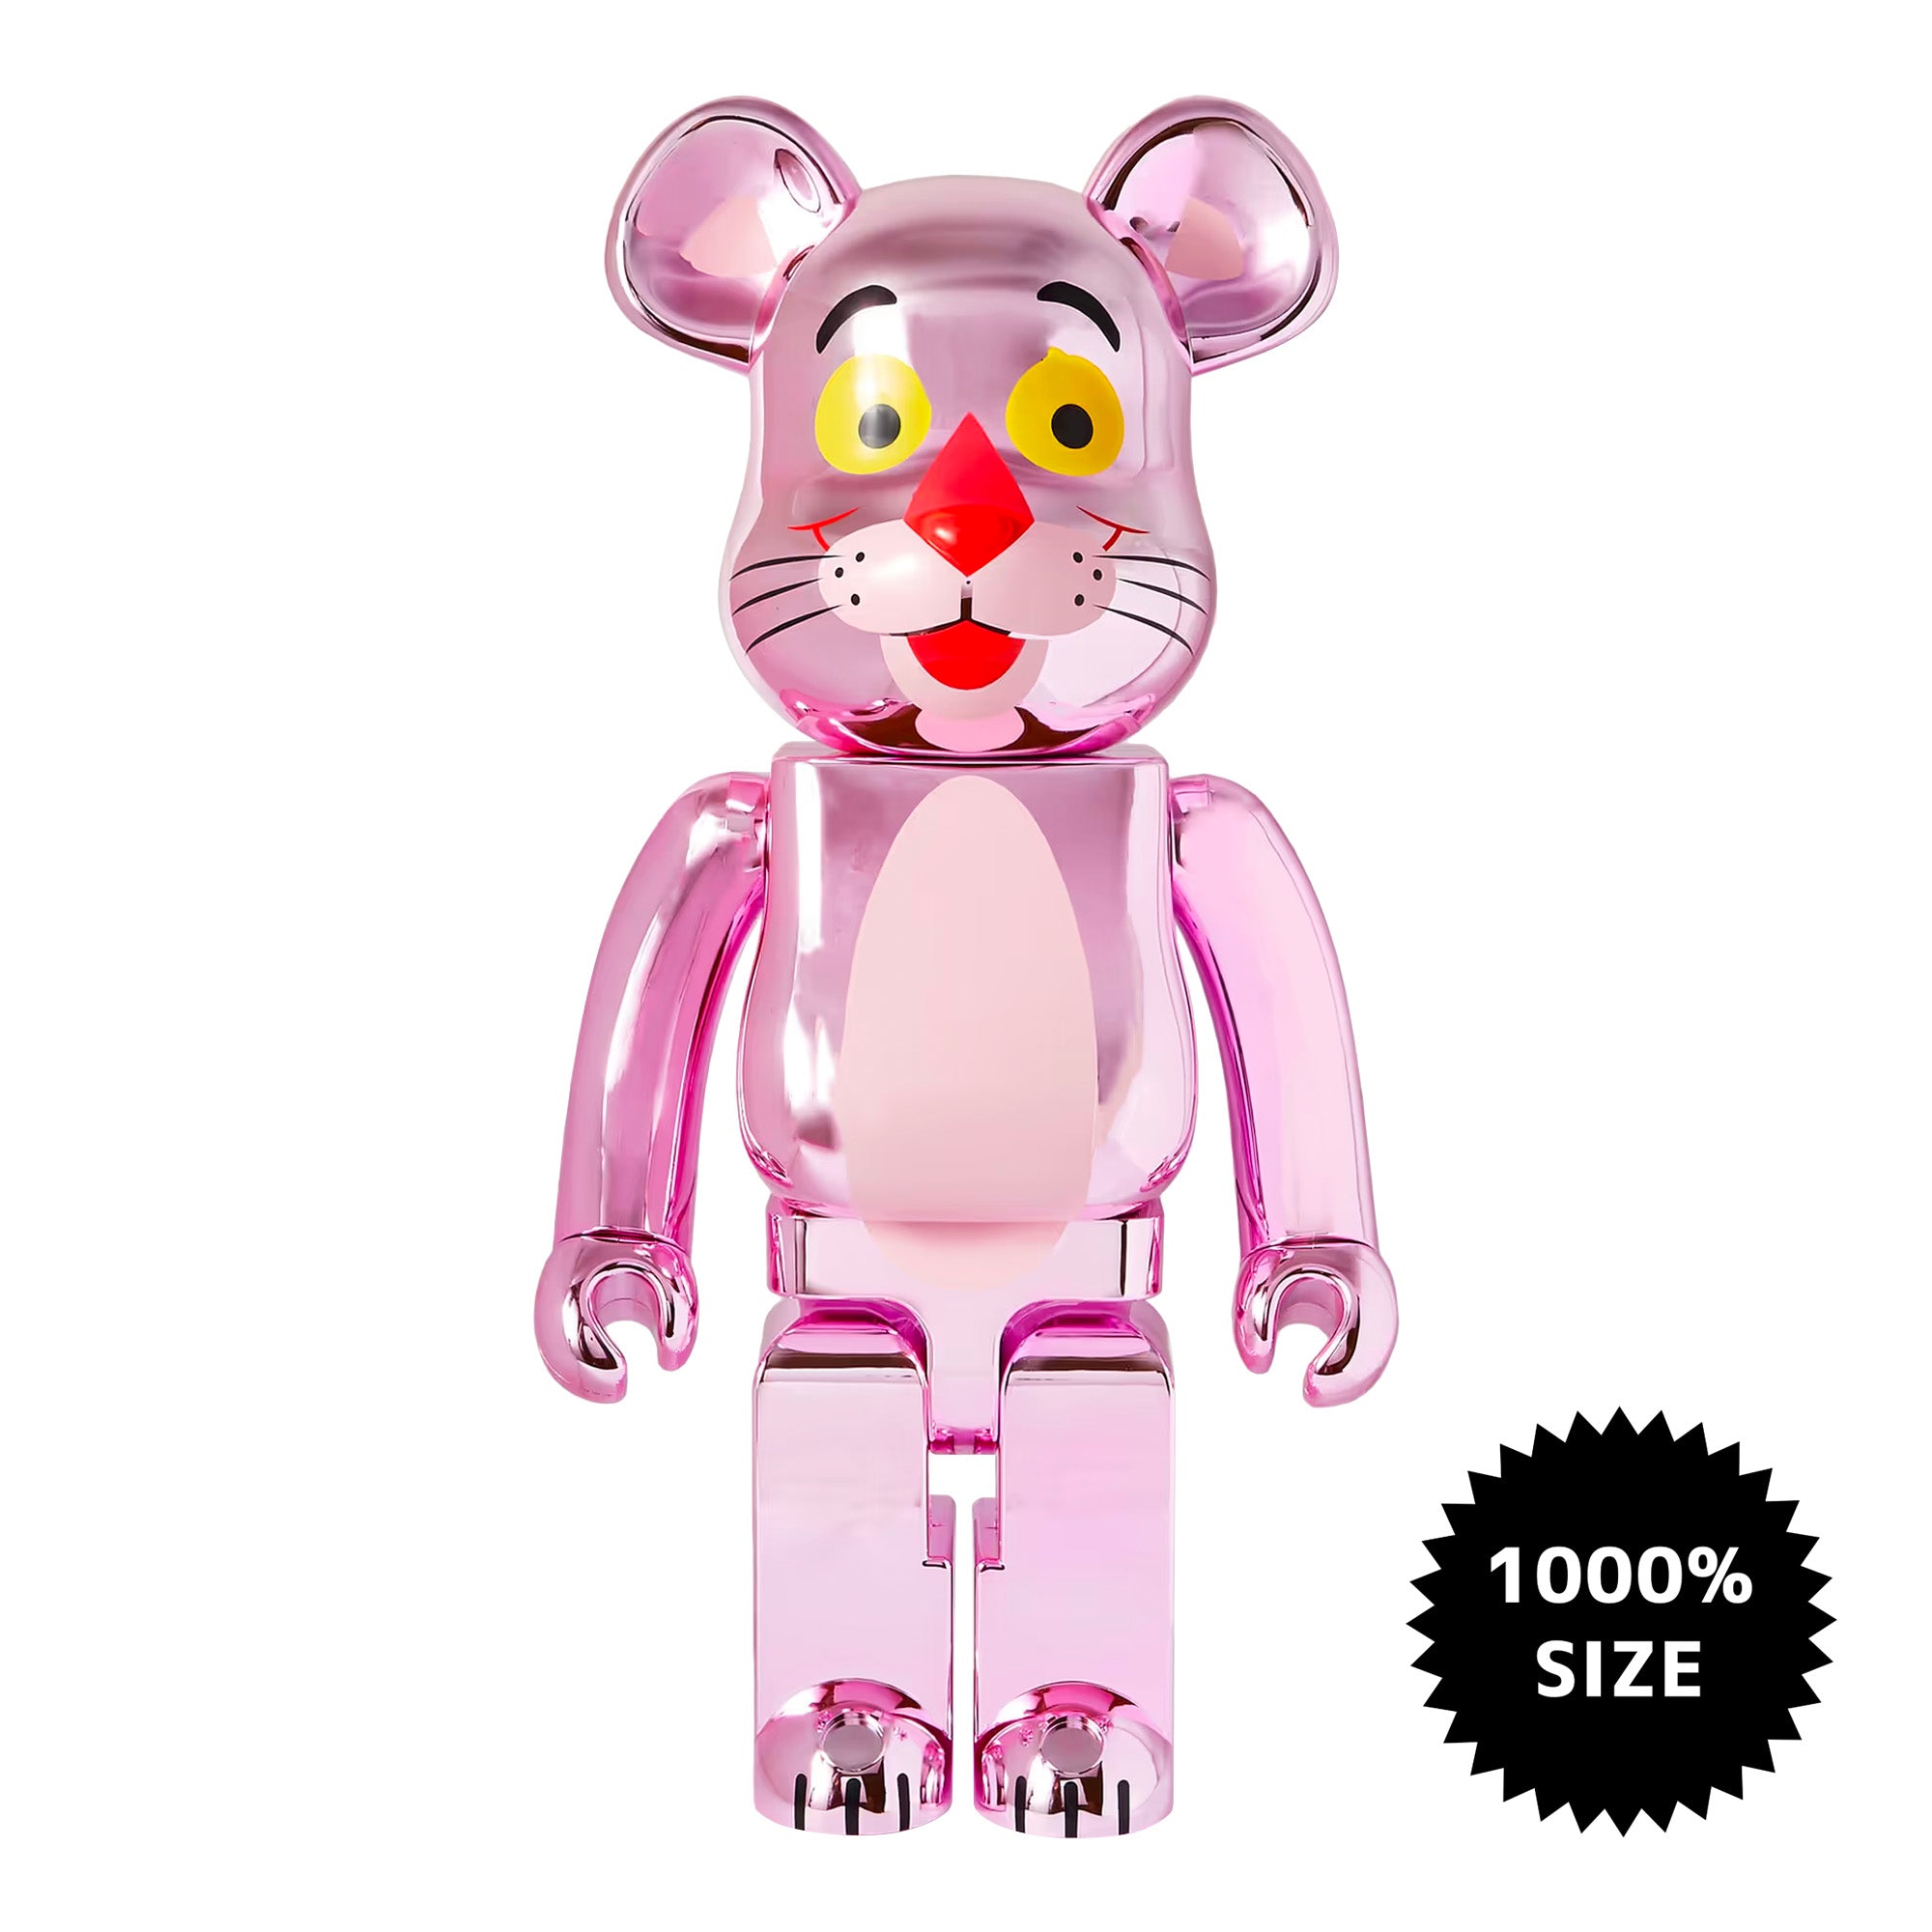 BE@RBRICK 1000% ピンクパンサー ベアブリック - キャラクターグッズ